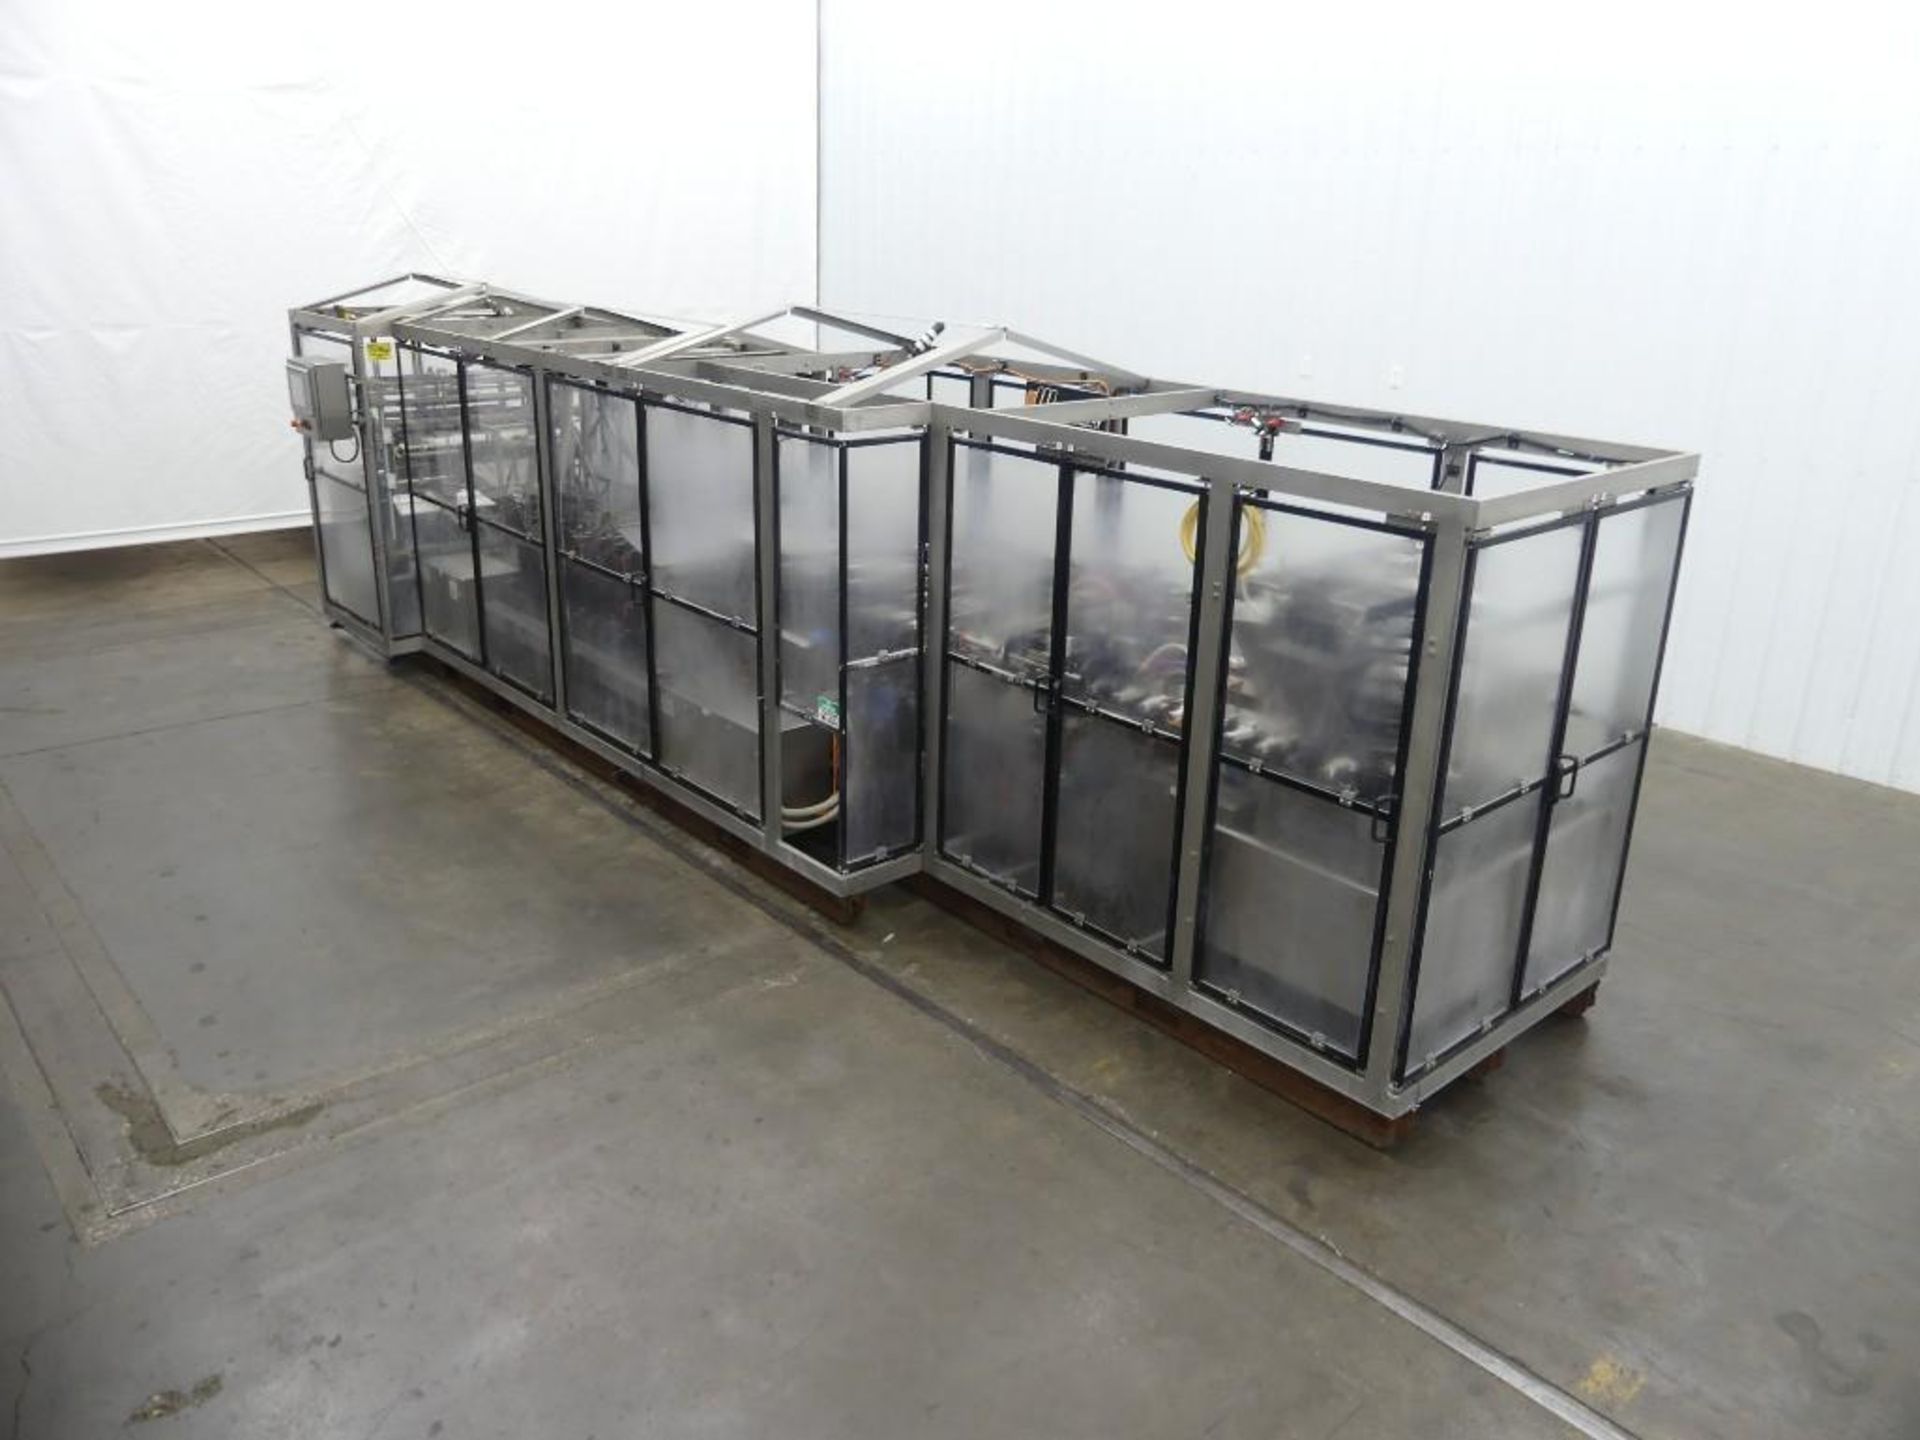 Massman HFFS-IM1000 Flexible Pouch Packaging System - Image 4 of 127